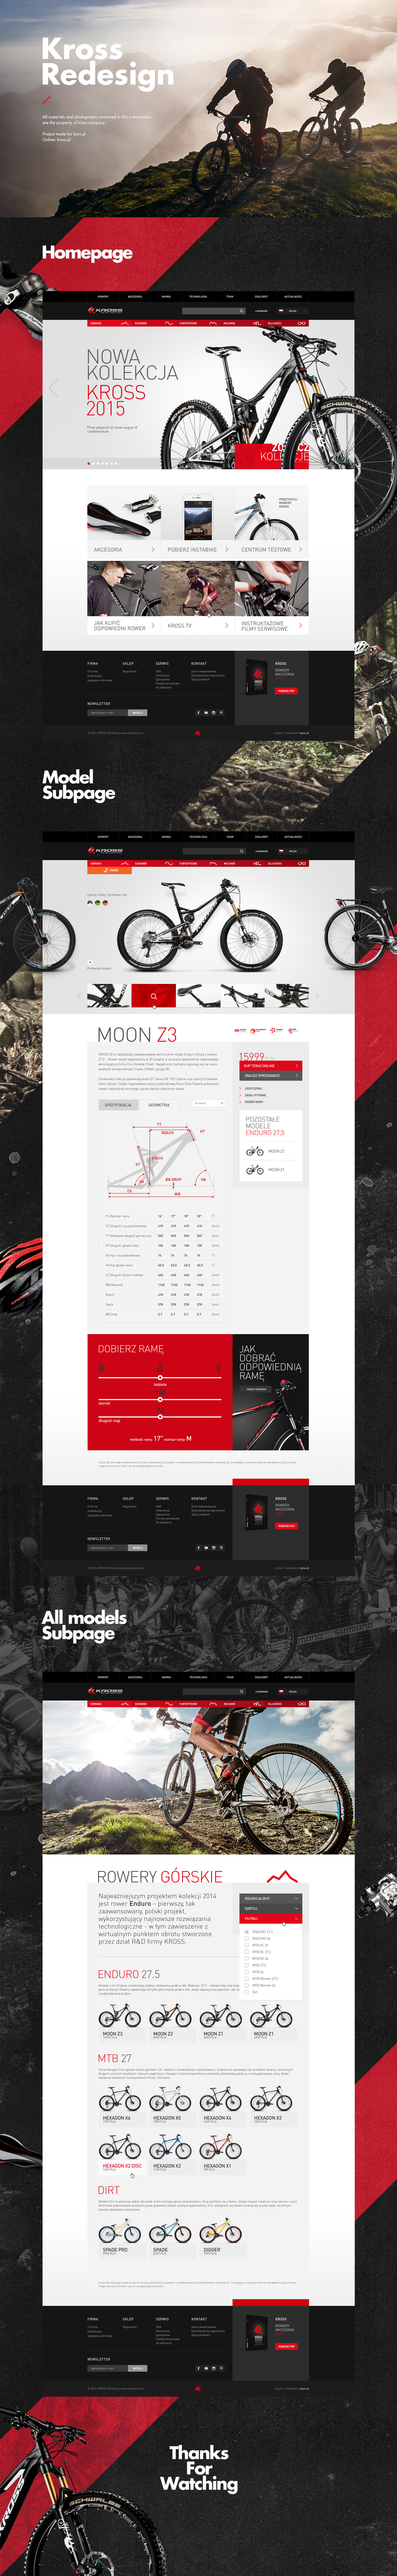 Website Webdesign UI ux Bike www Bicycle road websites Layout Theme site template red shop